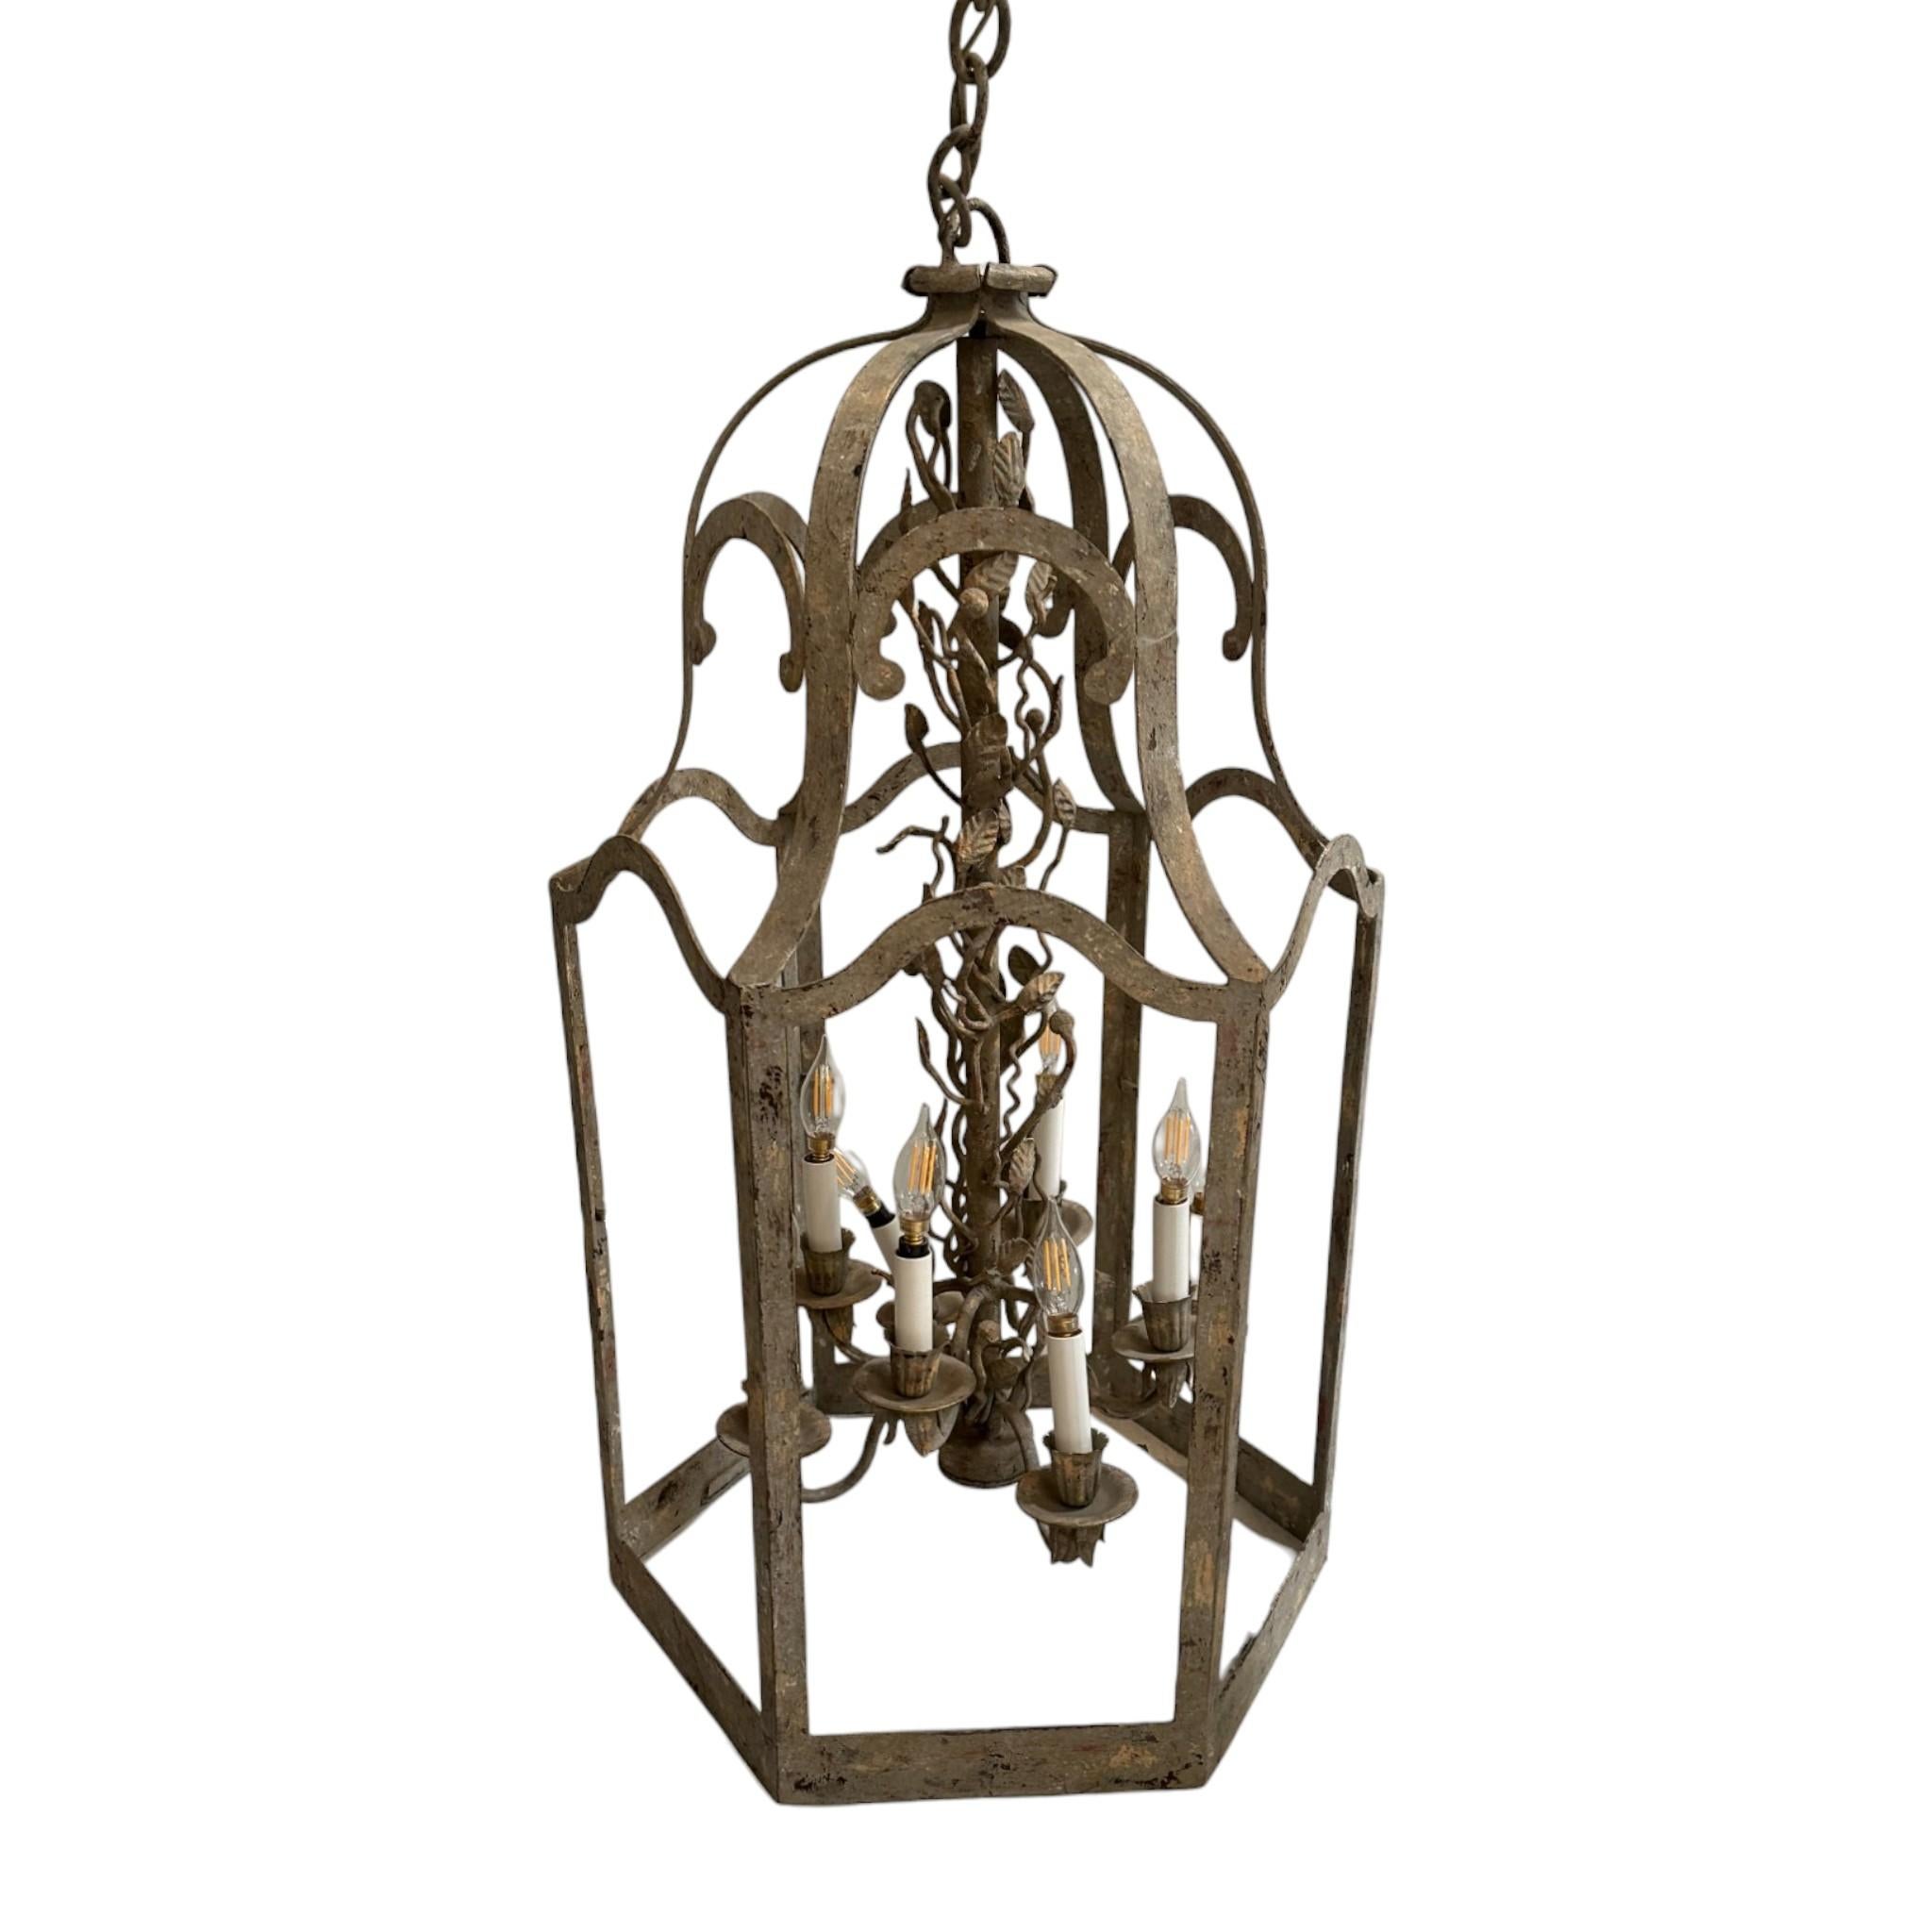 This Vintage Iron Lantern Chandelier is a special find that features delicate candelabra-style lamps nestled within an iron canopy and intricate leaf detailing.

The chandelier is a special find that would warmly illuminate intimate dining